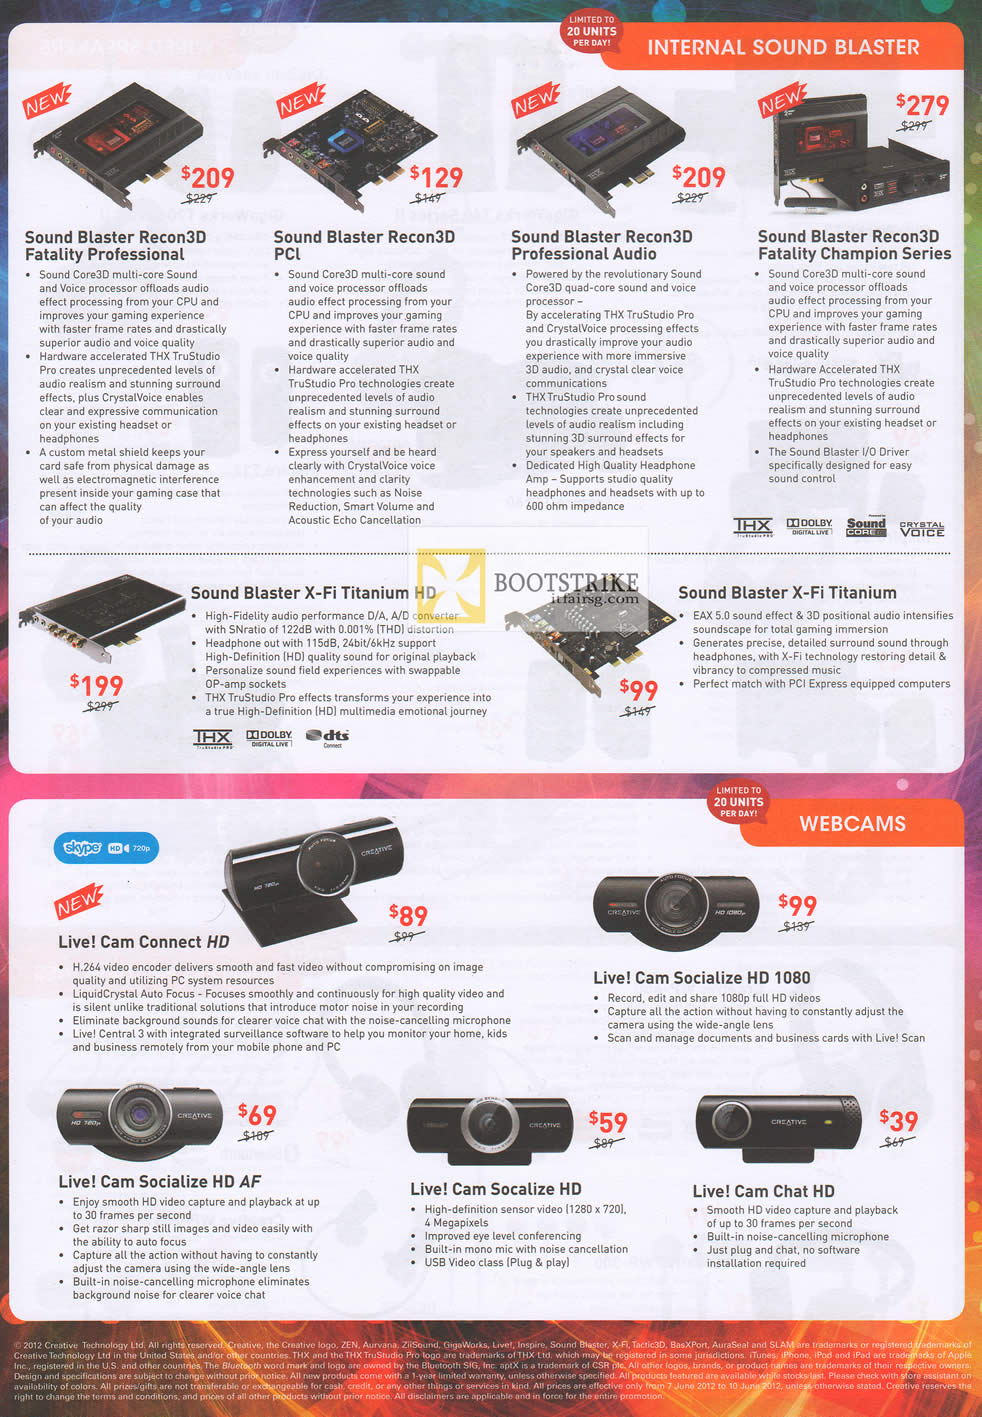 PC SHOW 2012 price list image brochure of Creative Sound Blaster Cards Recon3D Fatality Professional, PCI, Champion Series, Titanium HD, Webcam Live Cam Connect HD, Socialize 1080, HD AF, Chat HD